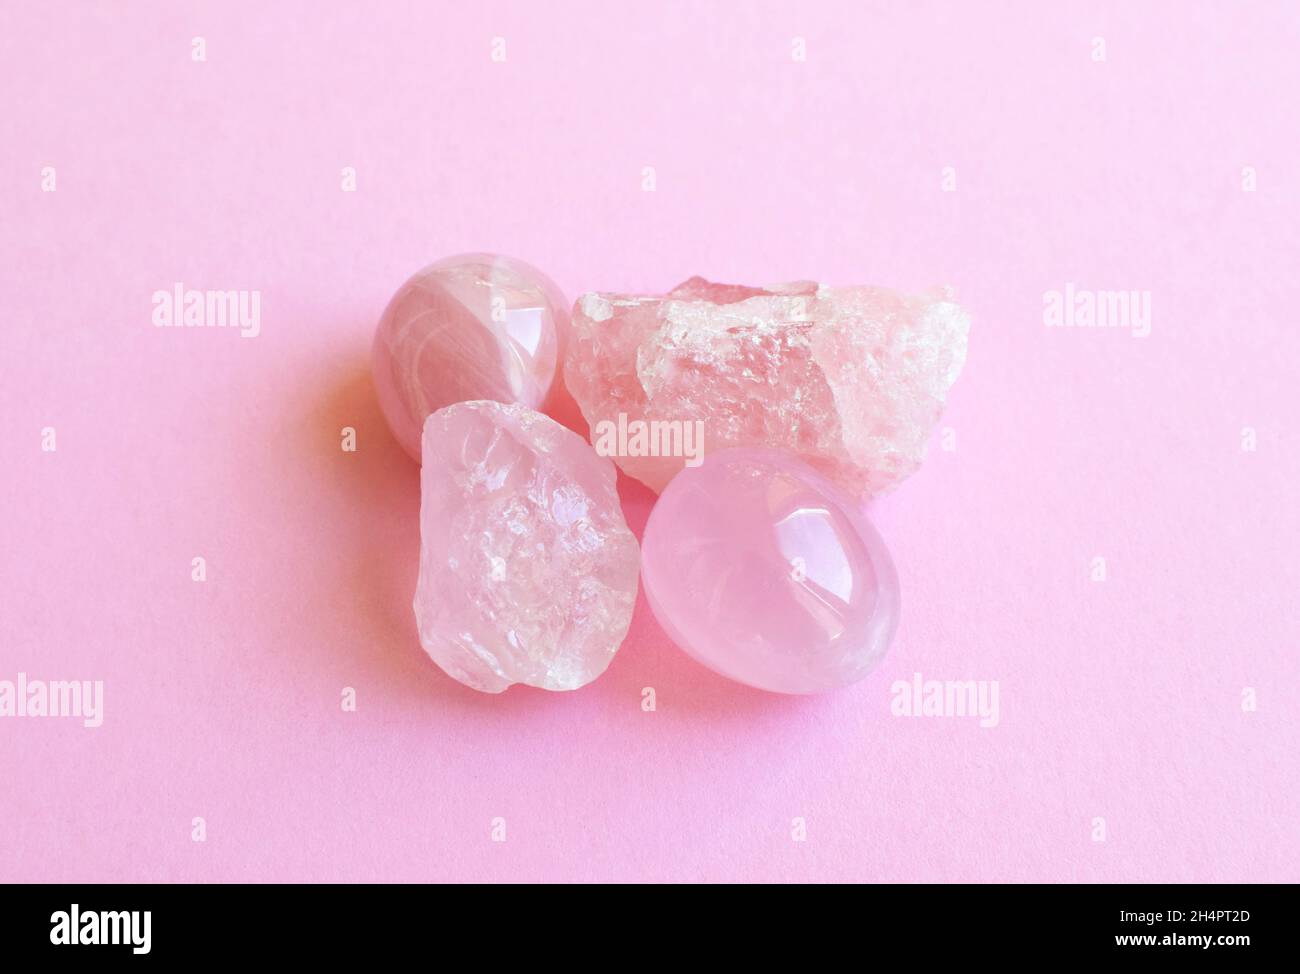 Crystals of rose quartz on a pink background. Beautiful semi-precious stones Stock Photo